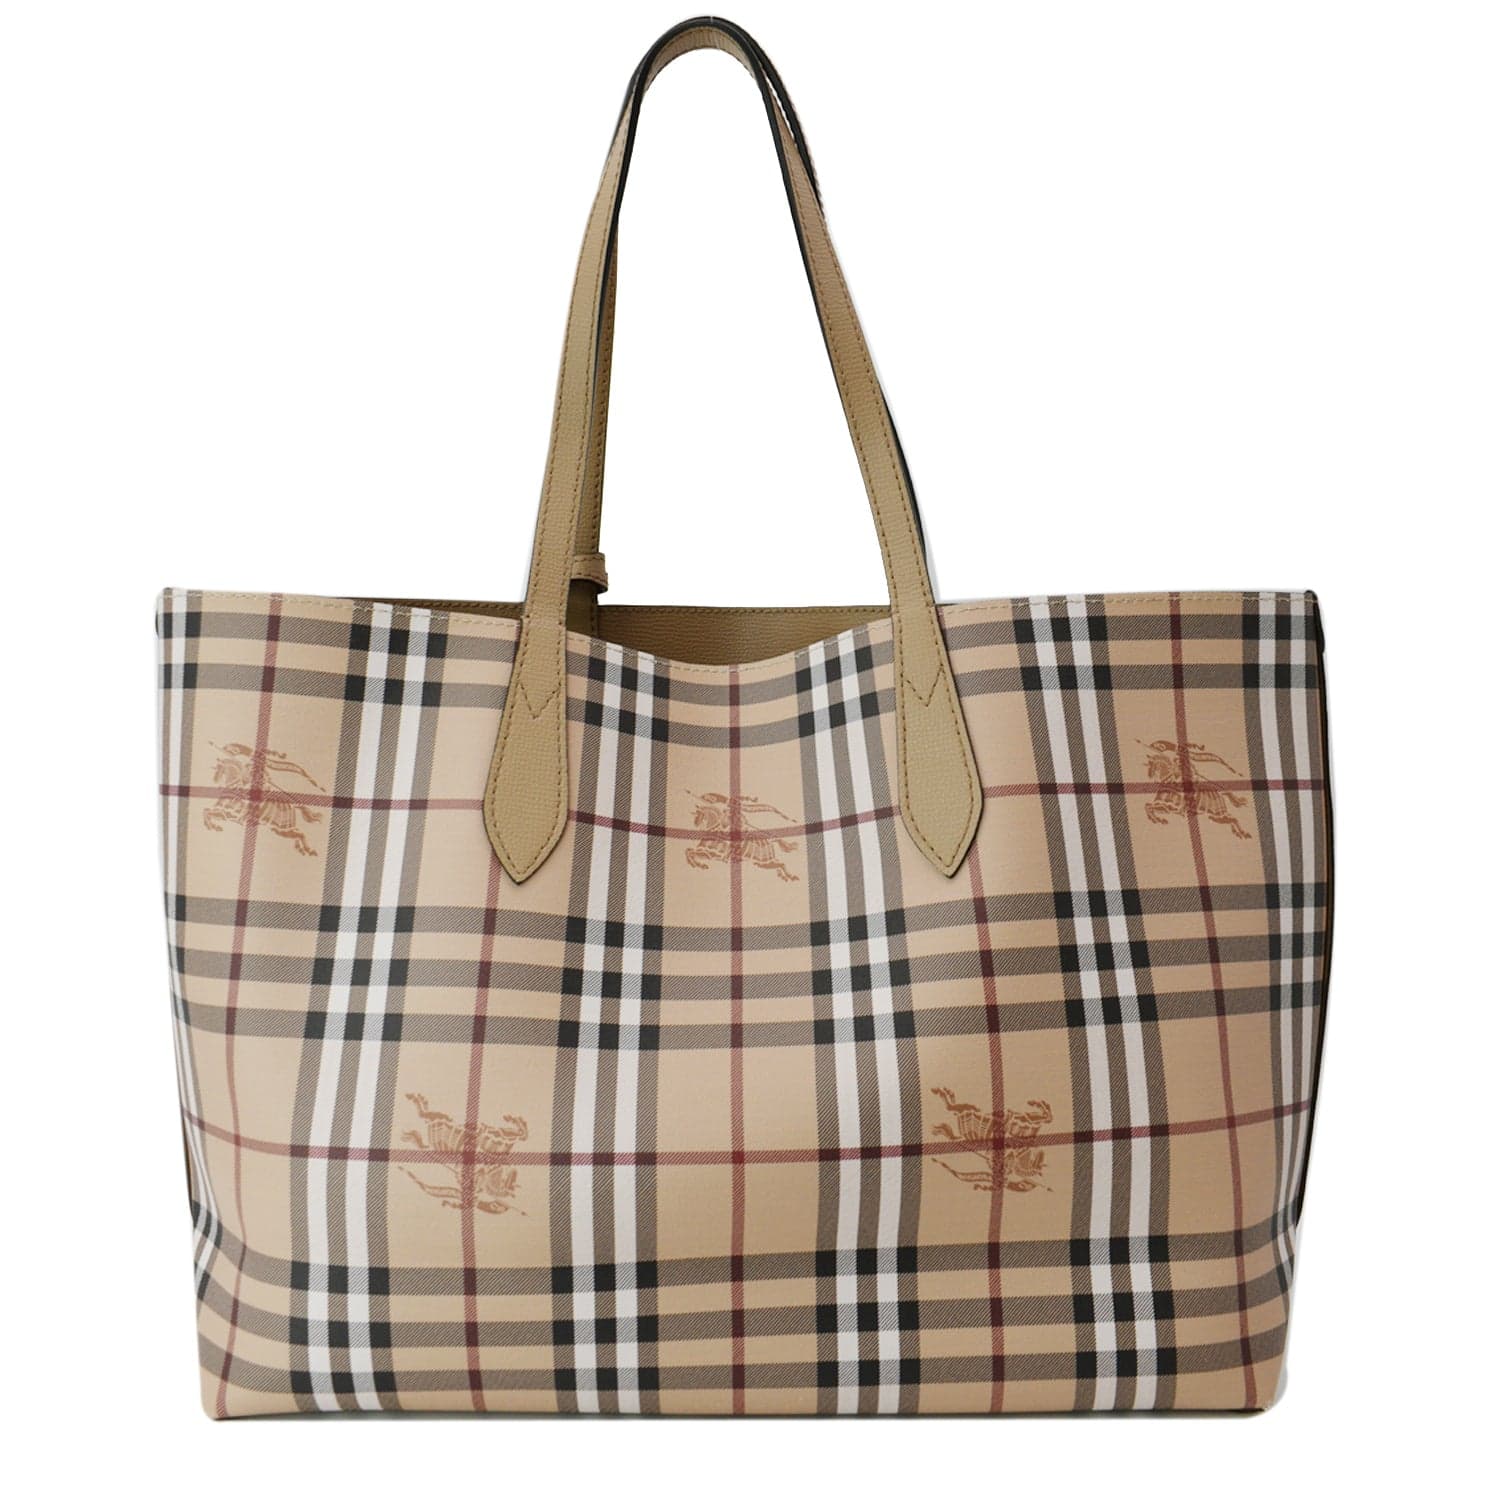 Burberry, Bags, Burberry Large Tote Reversible